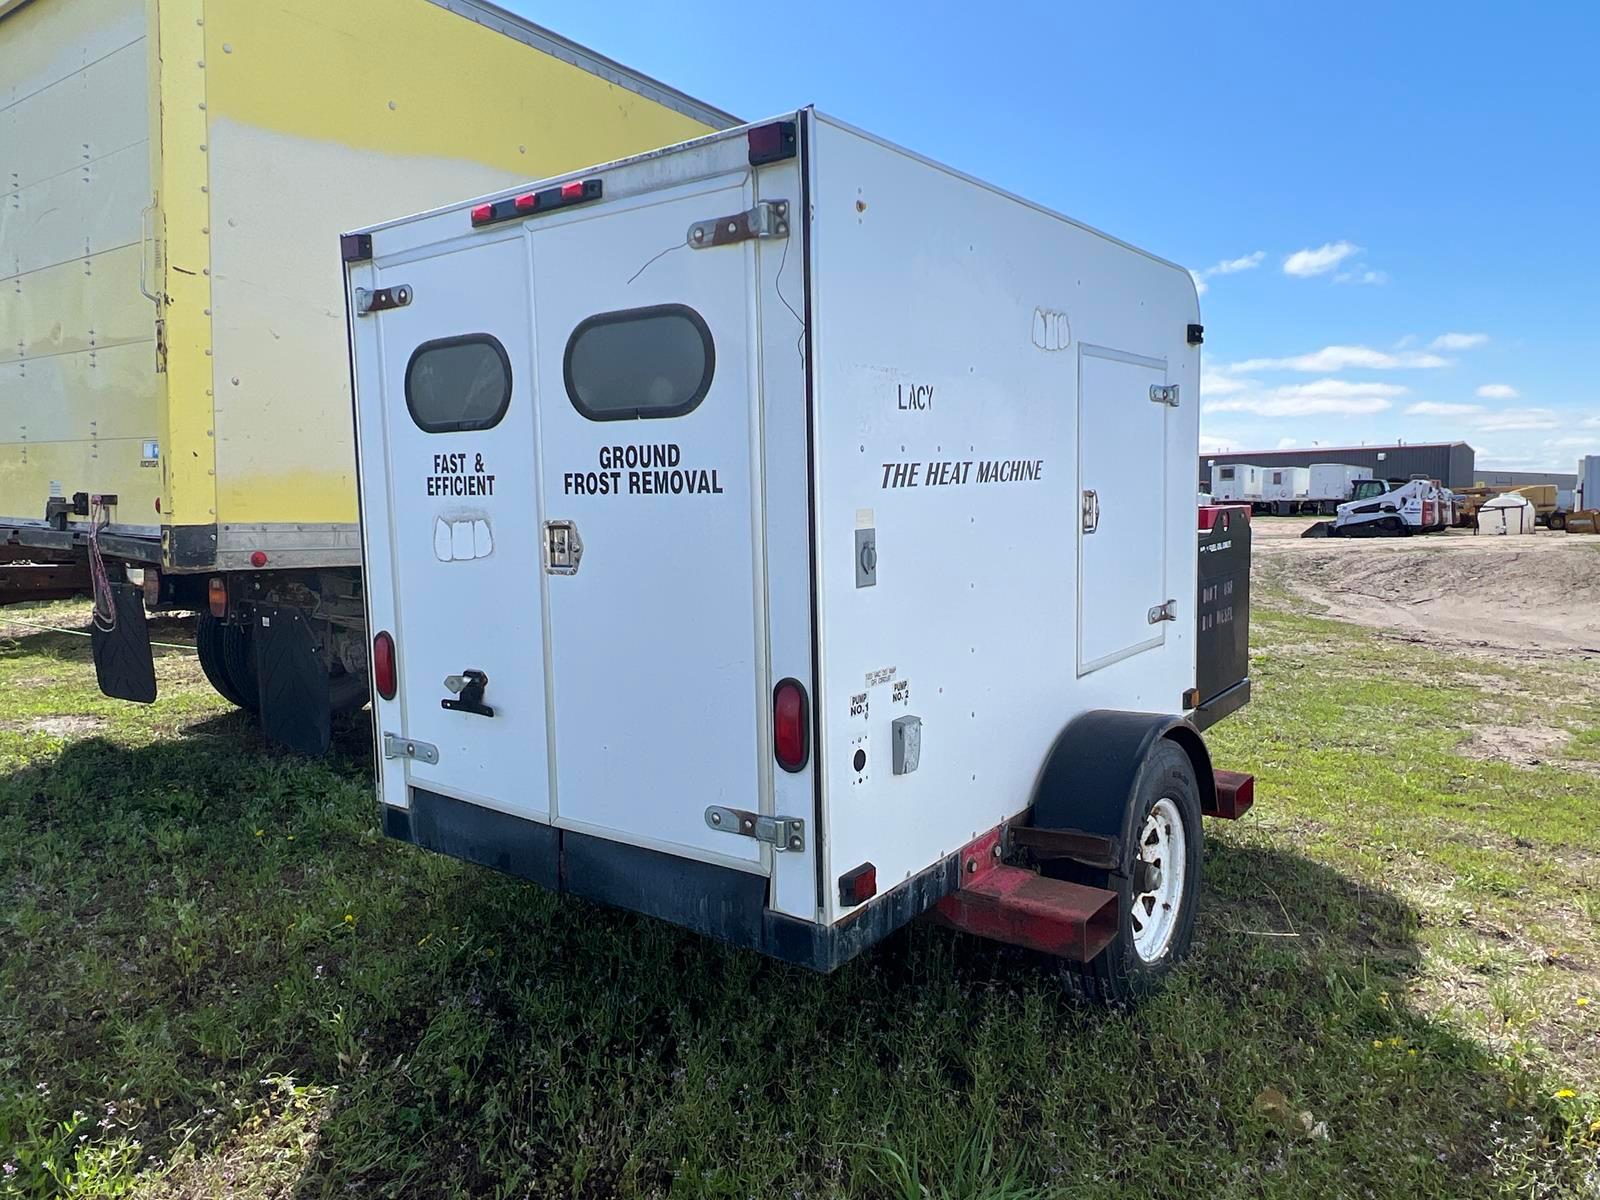 2004 Thawzall 15ft Thawing Trailer